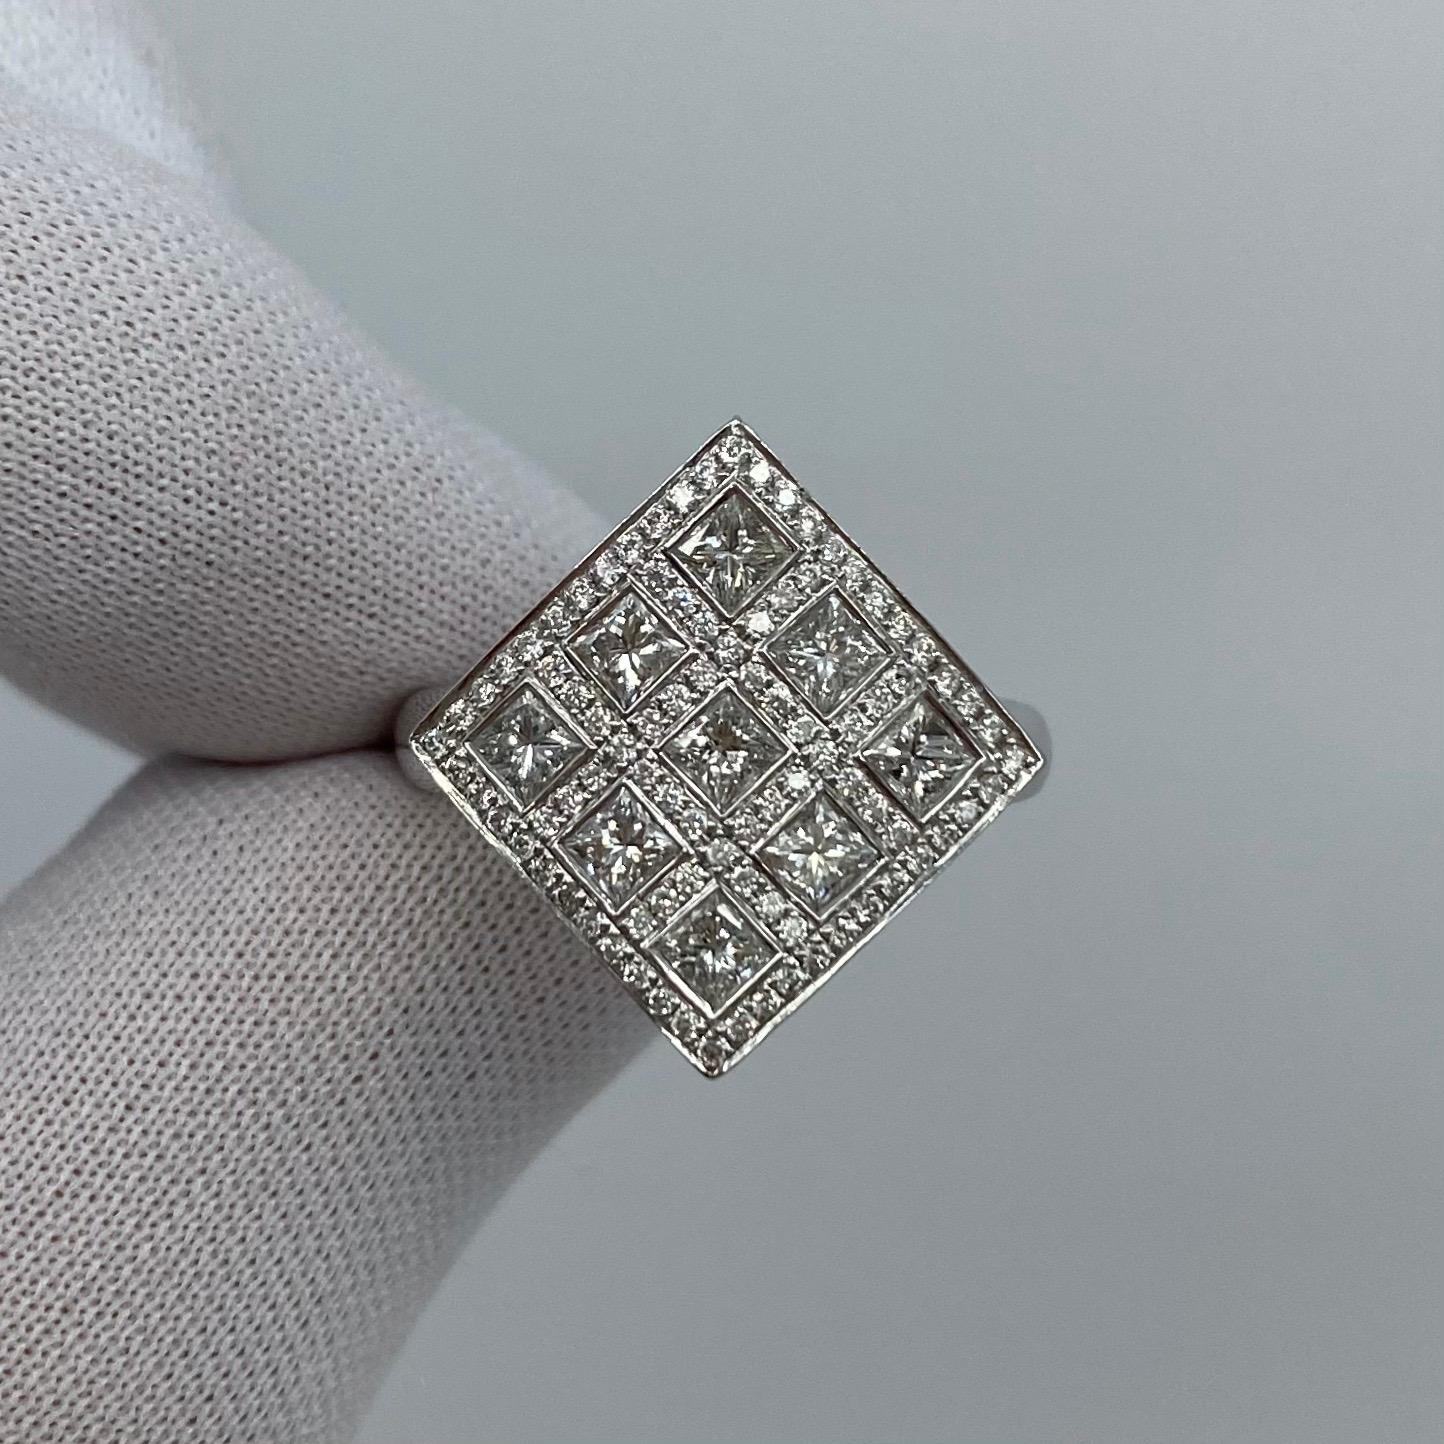 Art Deco Style Diamond Cluster Square Top Ring.

A beautiful and unique 2.08ct Square top ring in 18k white gold with x9 3mm Princess Cut diamonds approx 1.62ct and x92 1mm round white diamonds appox 0.46ct.
All diamonds have a very good to